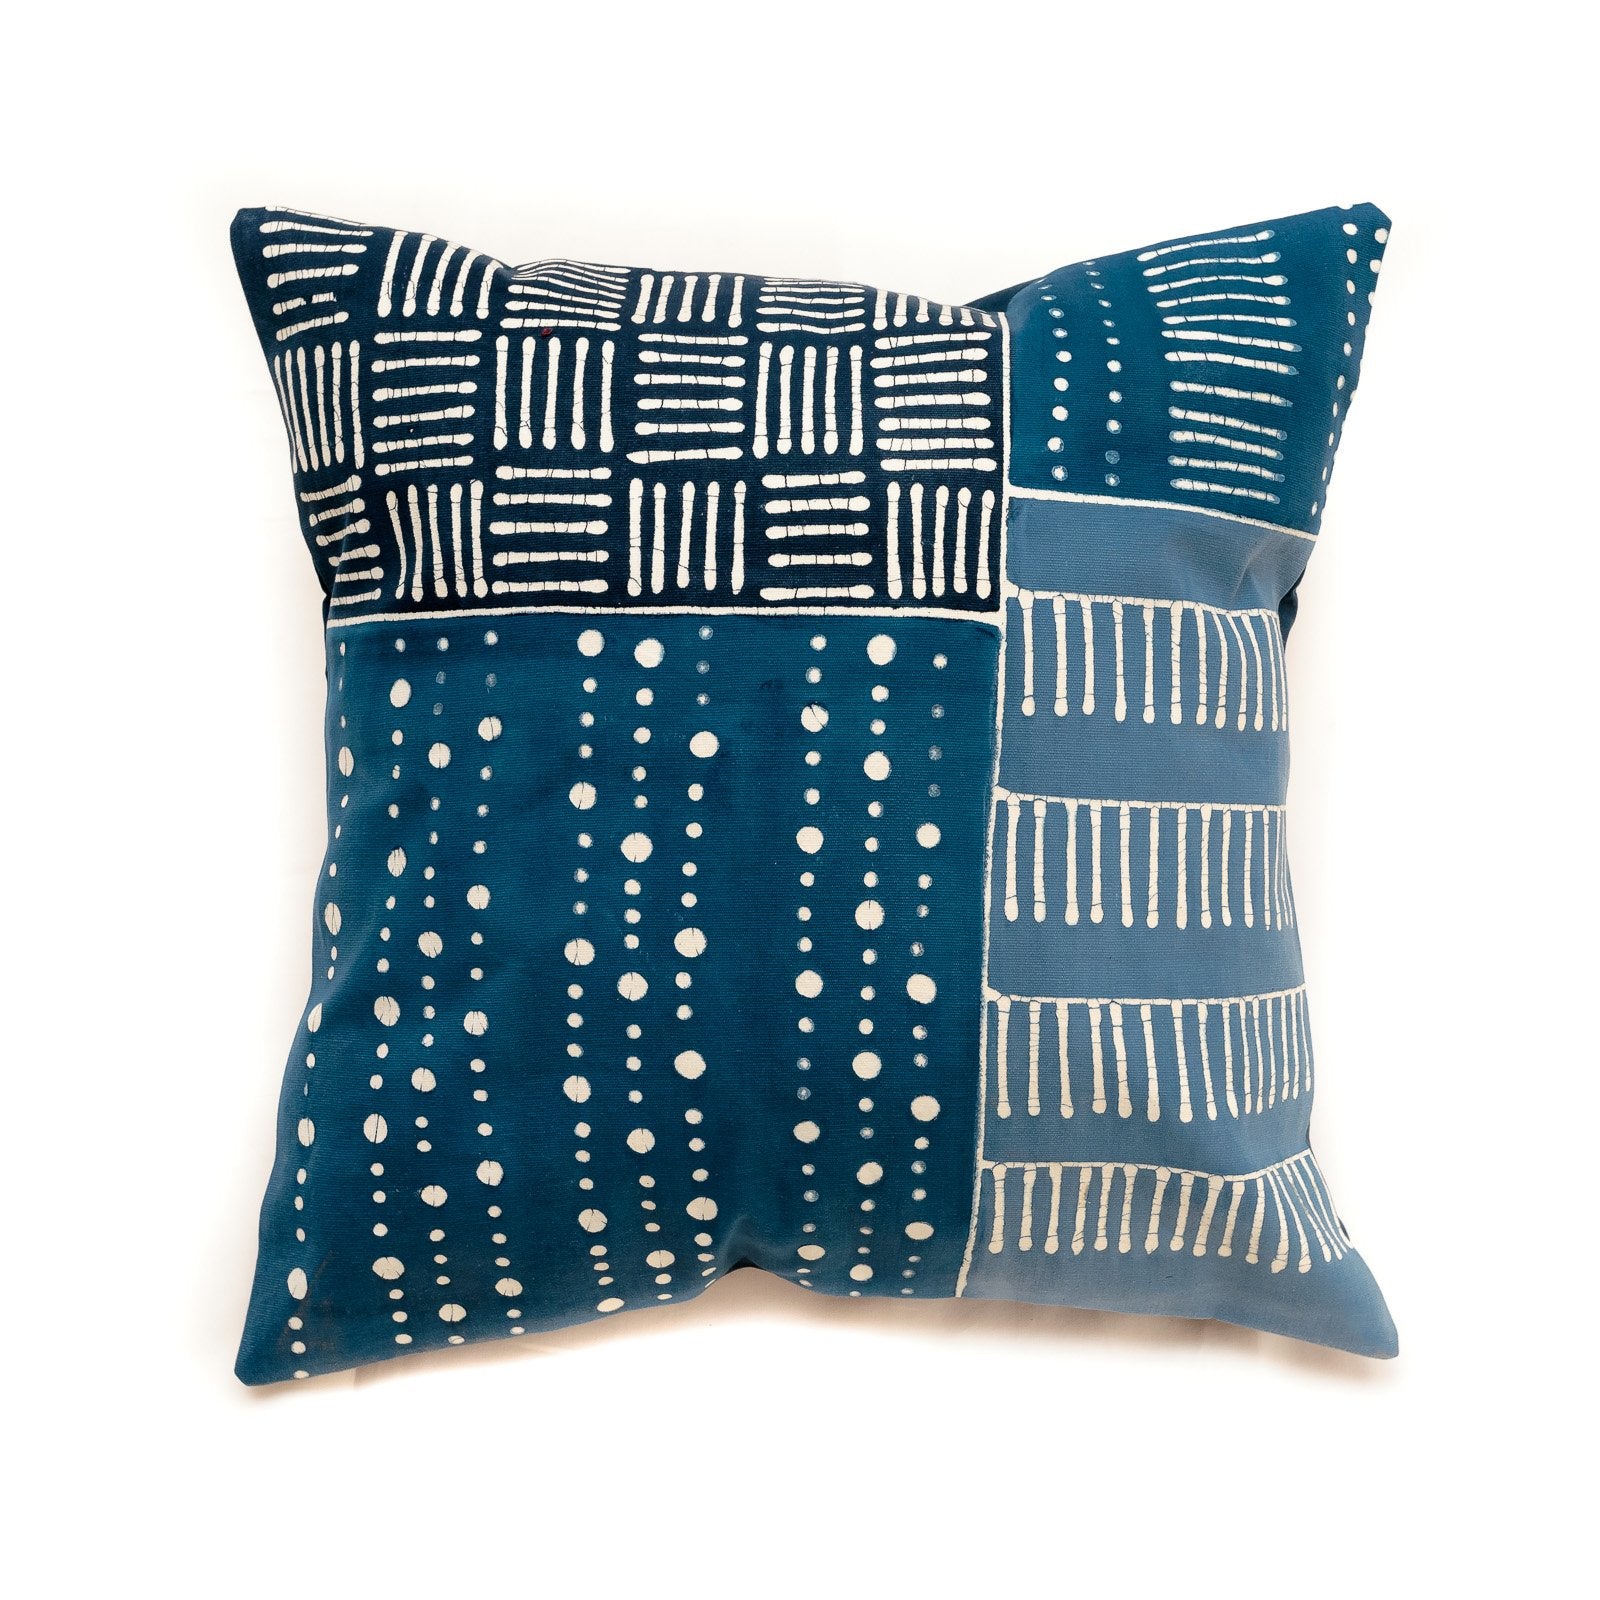 Tribal Cloth Indigo Patchwork Cushion Cover - Hand Painted by TRIBAL TEXTILES - Handcrafted Home Decor Interiors